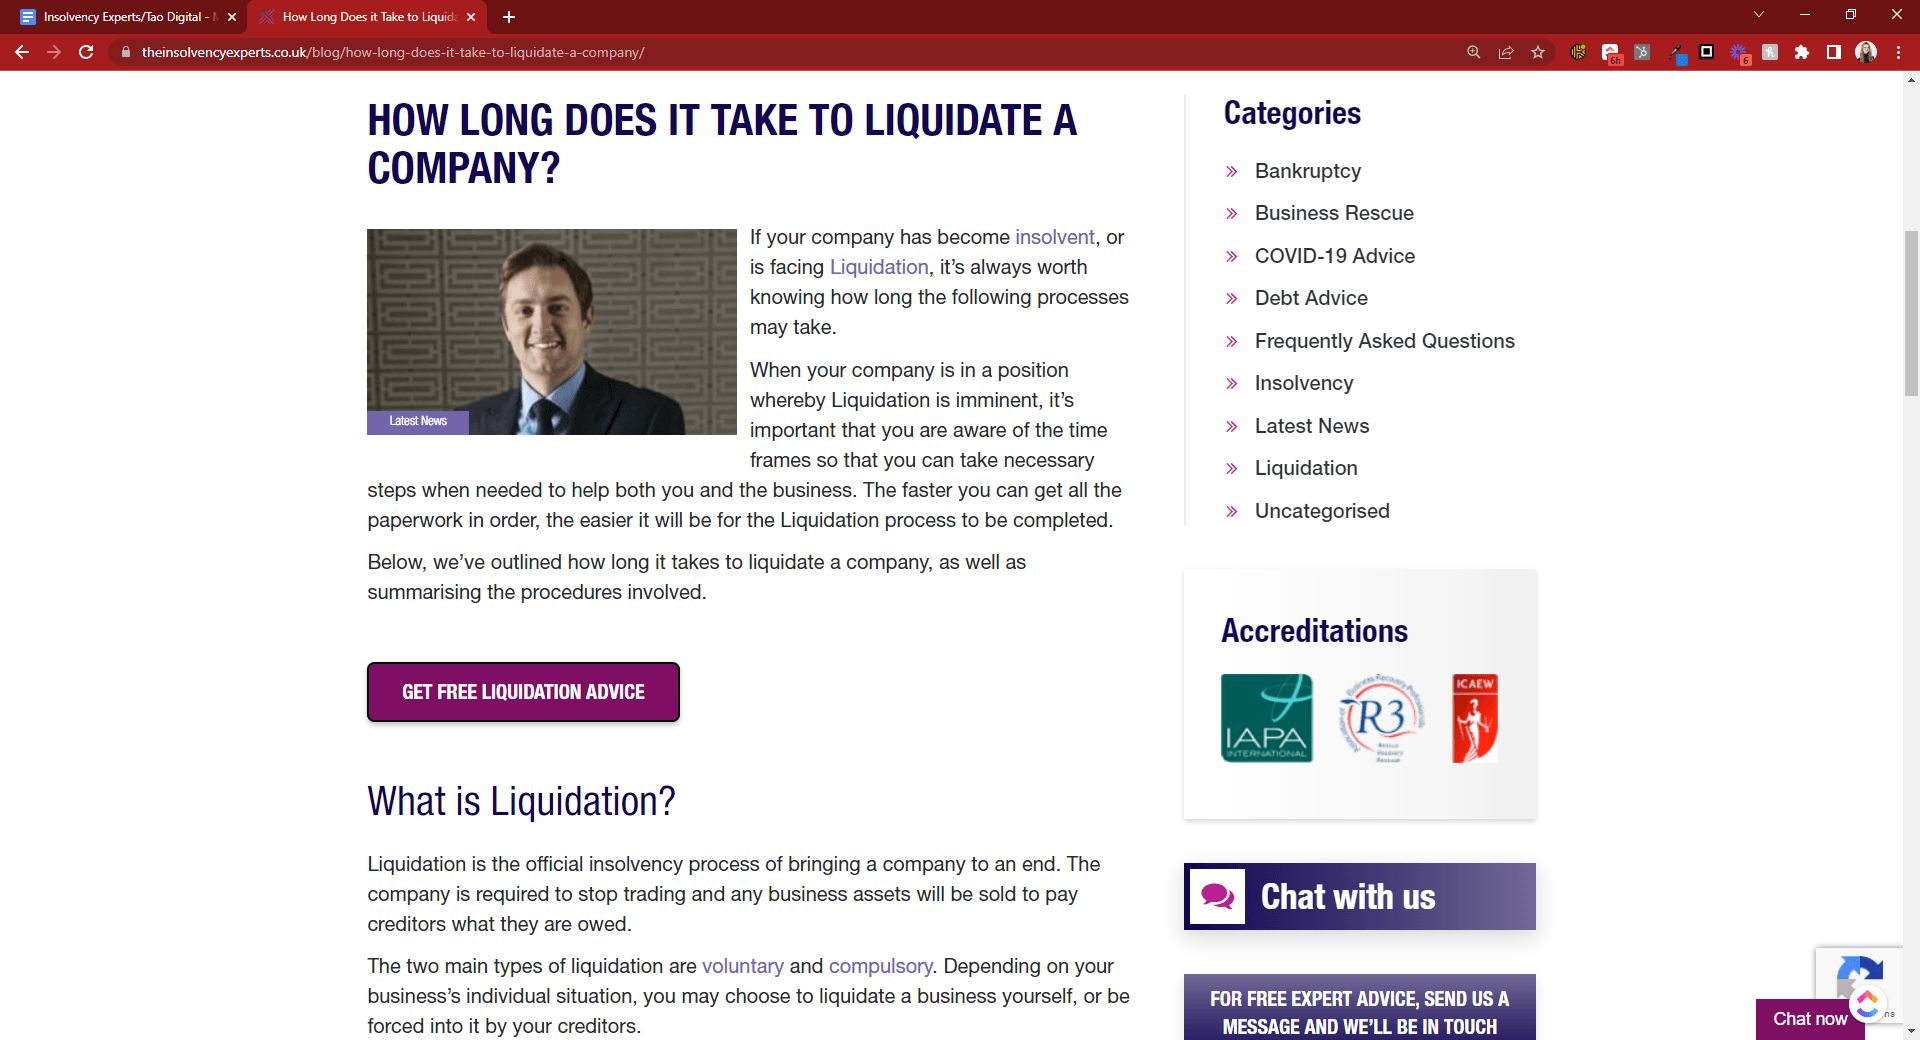 An example of a piece of content with a ‘Get Free Liquidation Advice’ CTA in the middle